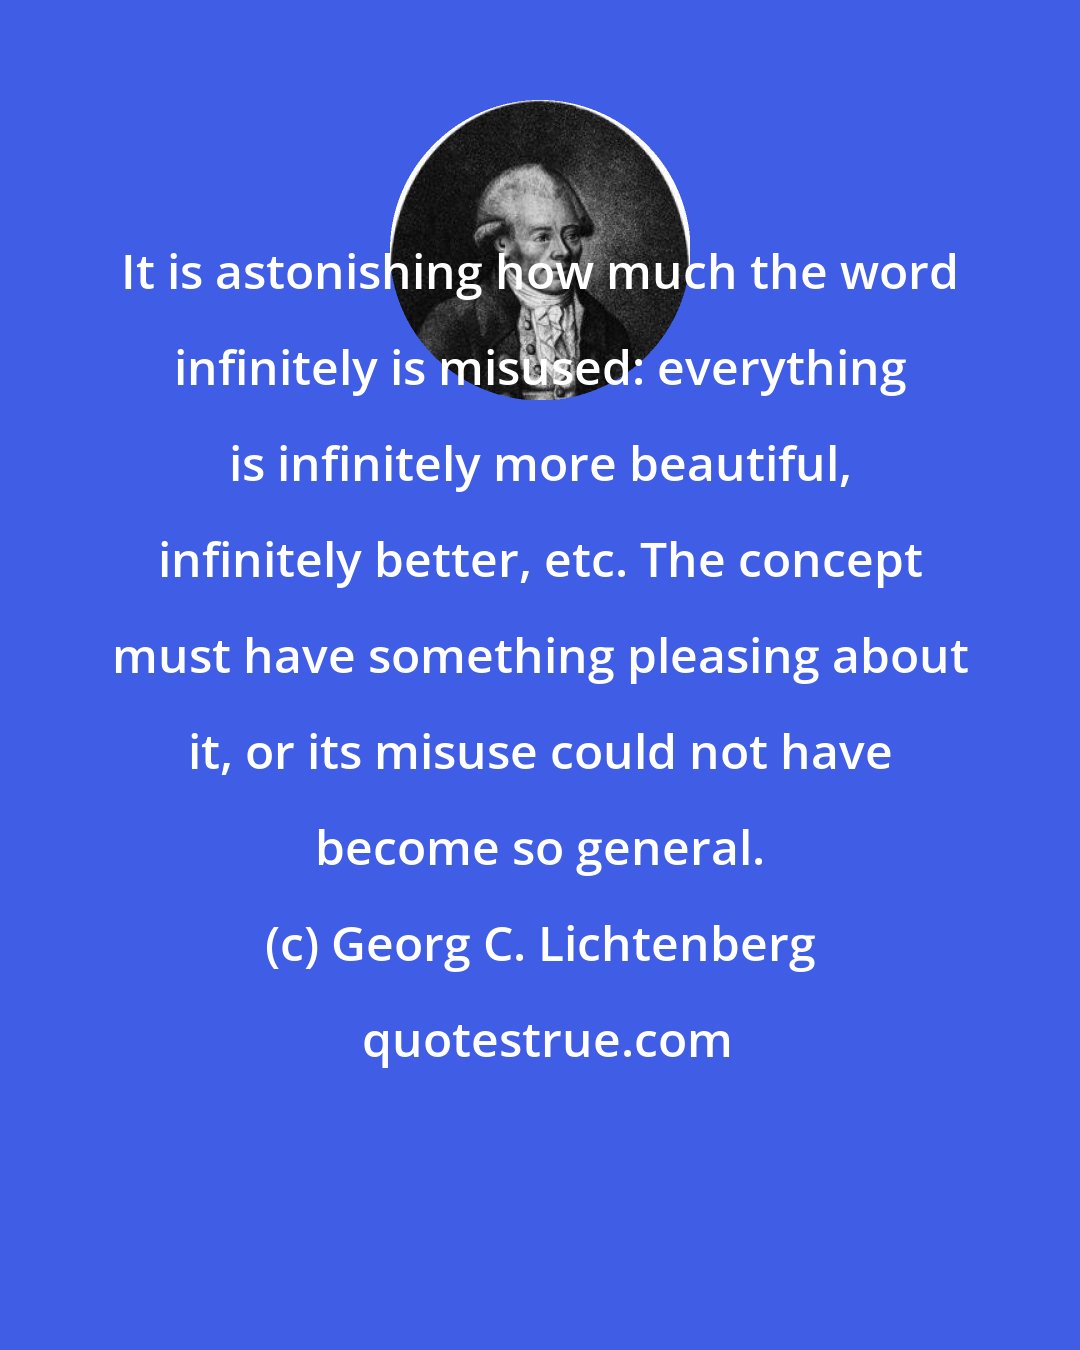 Georg C. Lichtenberg: It is astonishing how much the word infinitely is misused: everything is infinitely more beautiful, infinitely better, etc. The concept must have something pleasing about it, or its misuse could not have become so general.